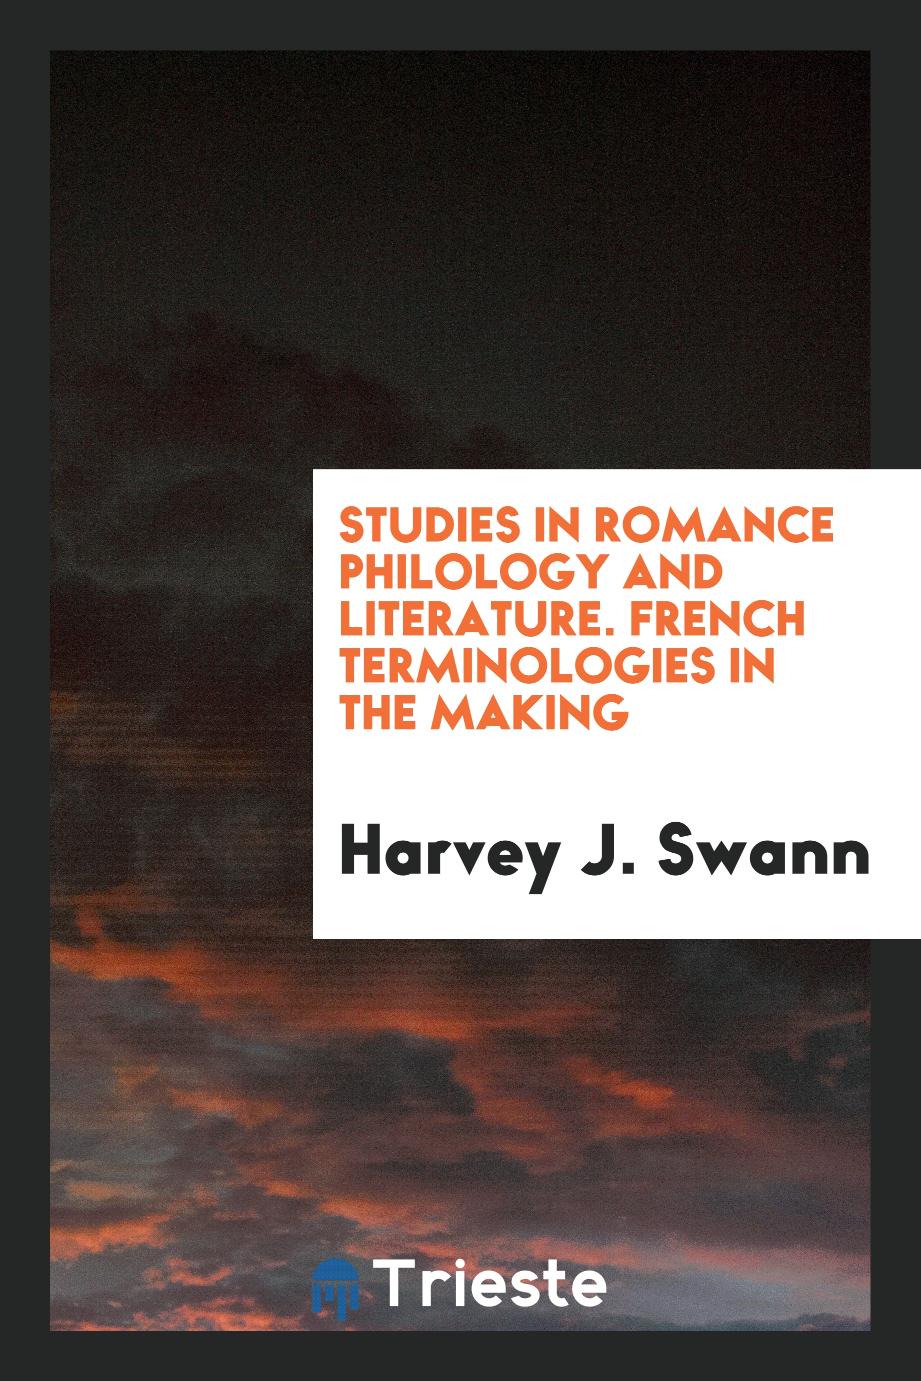 Studies in Romance Philology and Literature. French Terminologies in the Making